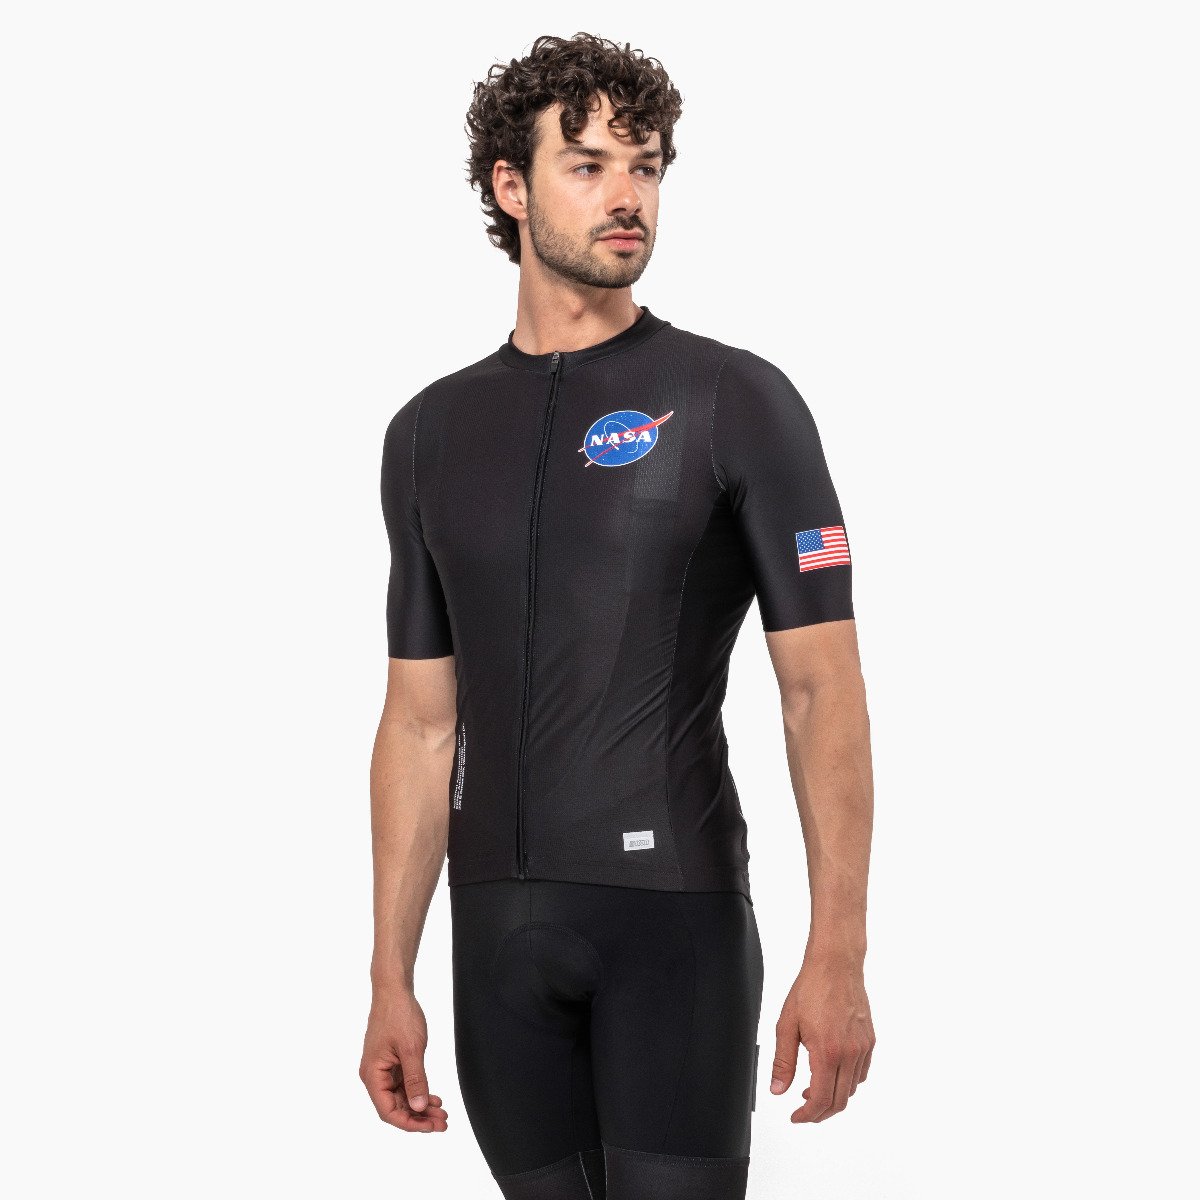 MAILLOT DE CICLISMO X-OVER - SPACE AGENCY 18